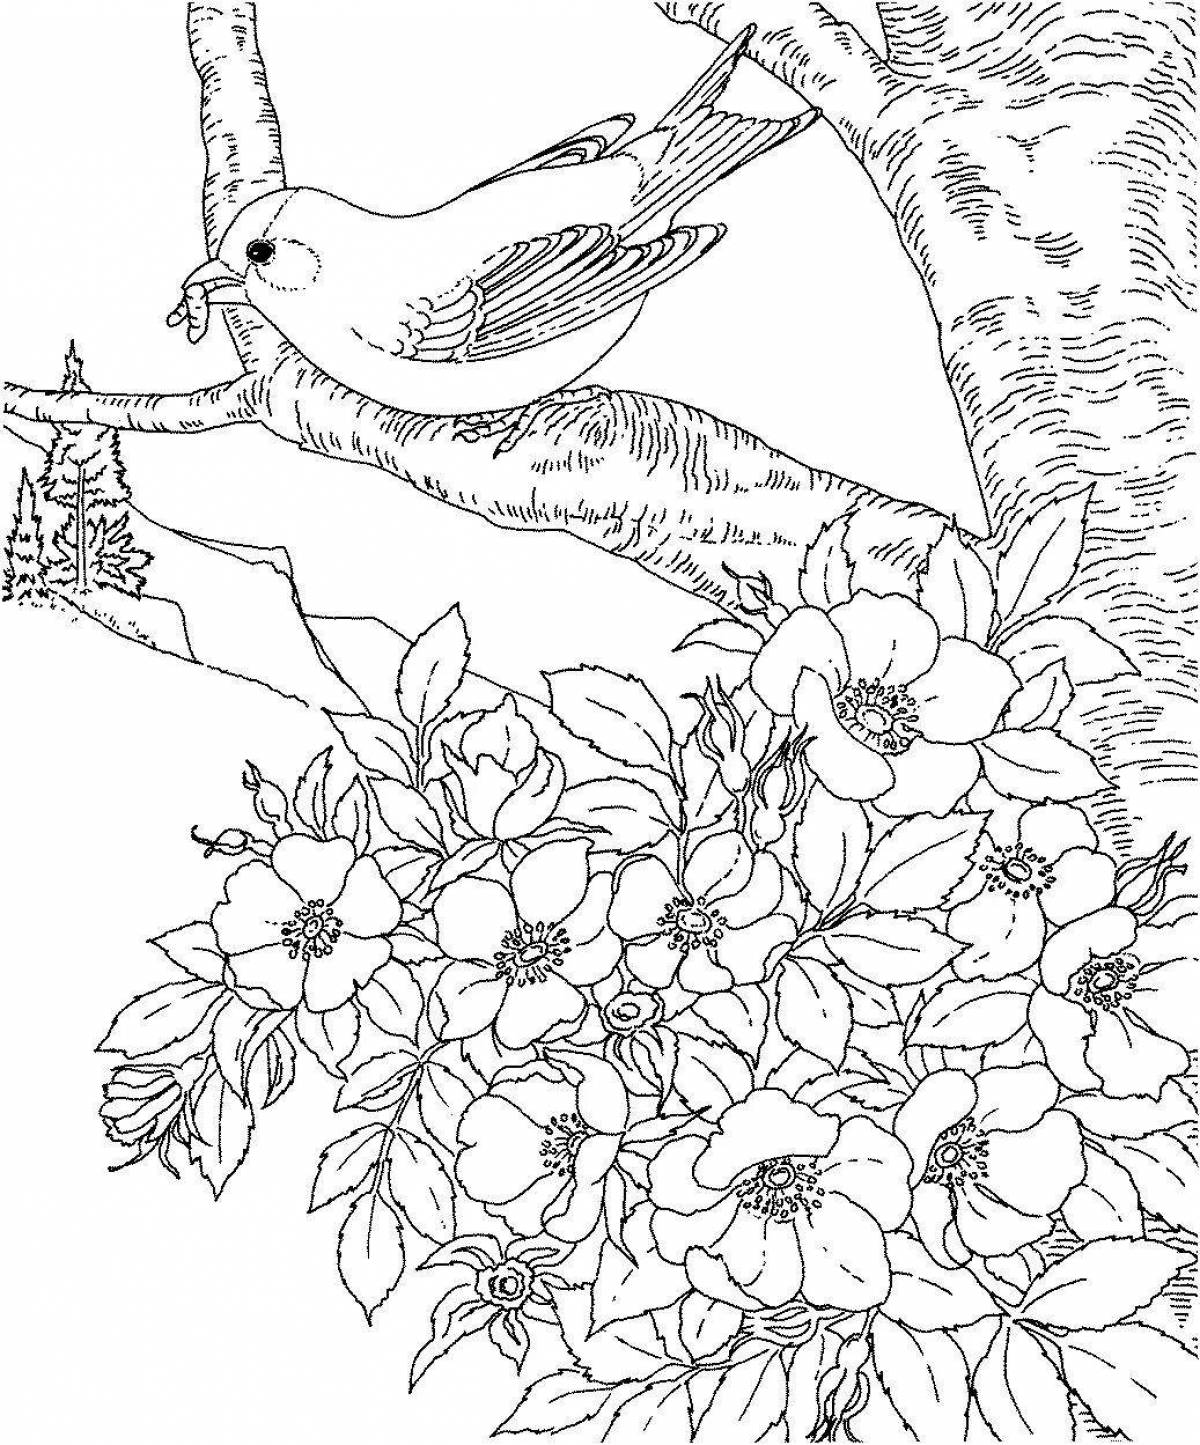 Fancy coloring for girls nature and flowers animals